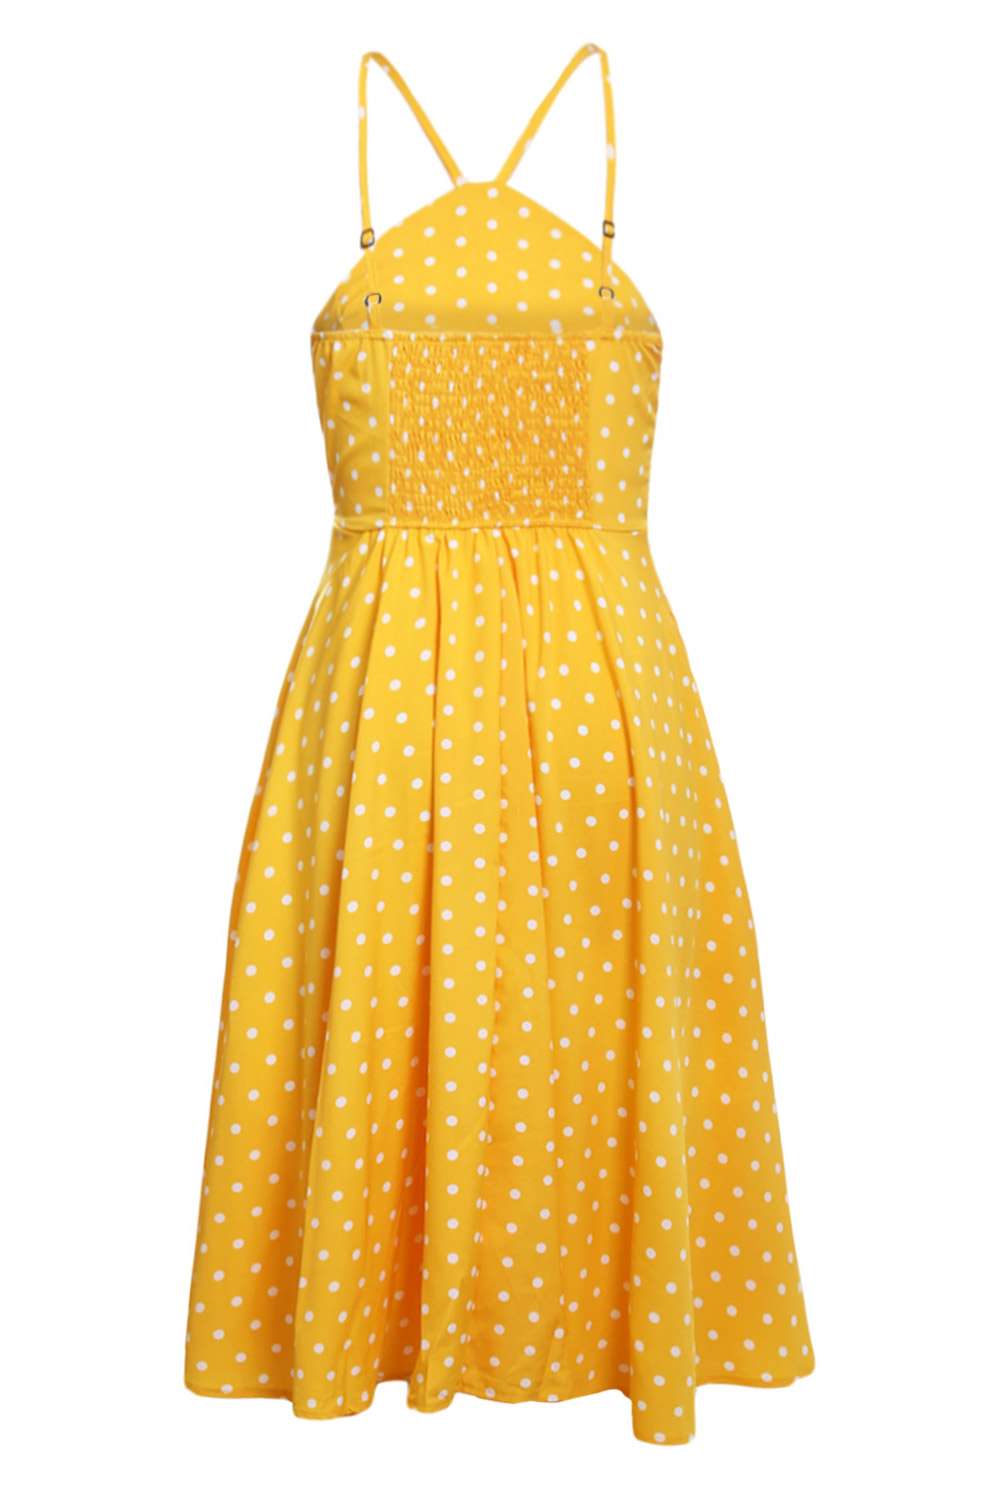 BY610141-7 Yellow White Polka Dot Flared Vintage Dress